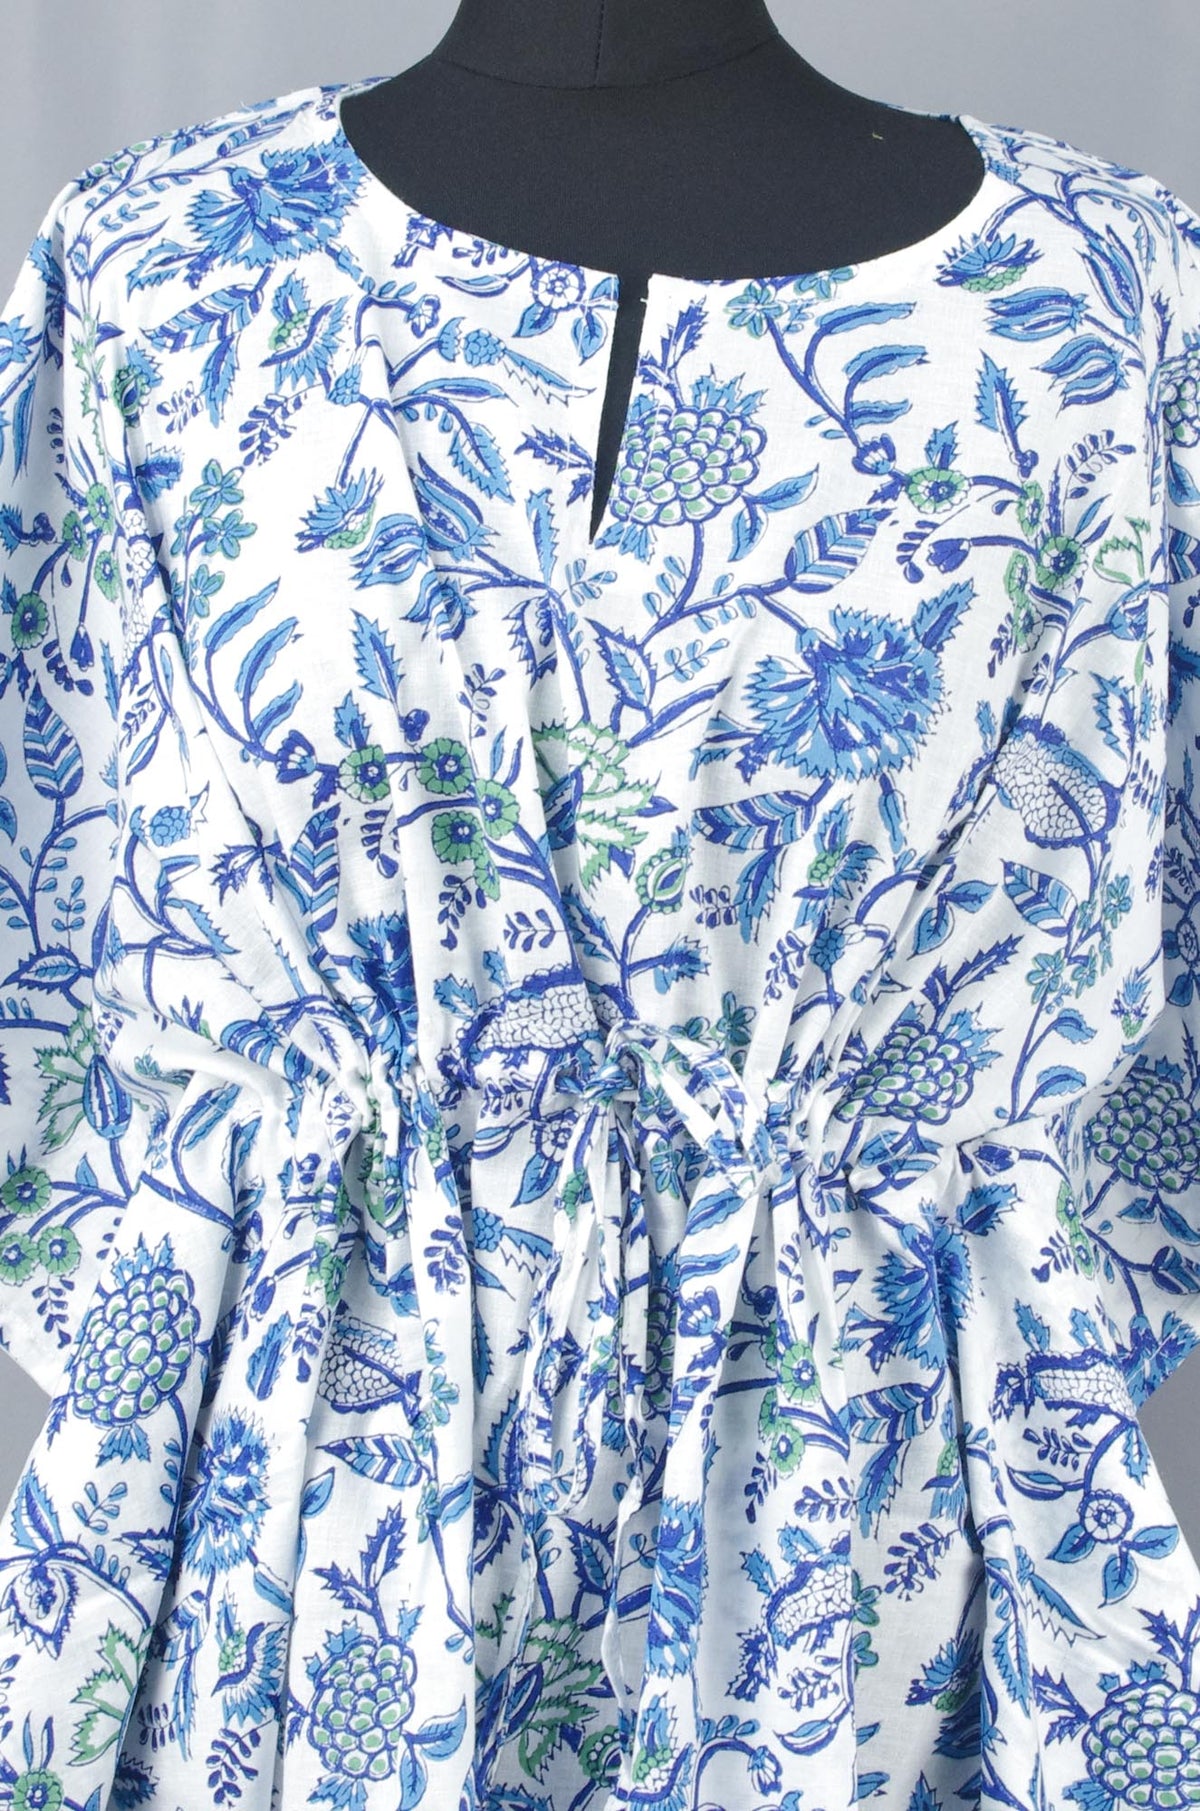 Block Printed Cotton Coverup / Kaftans - White Blue Wildflowers